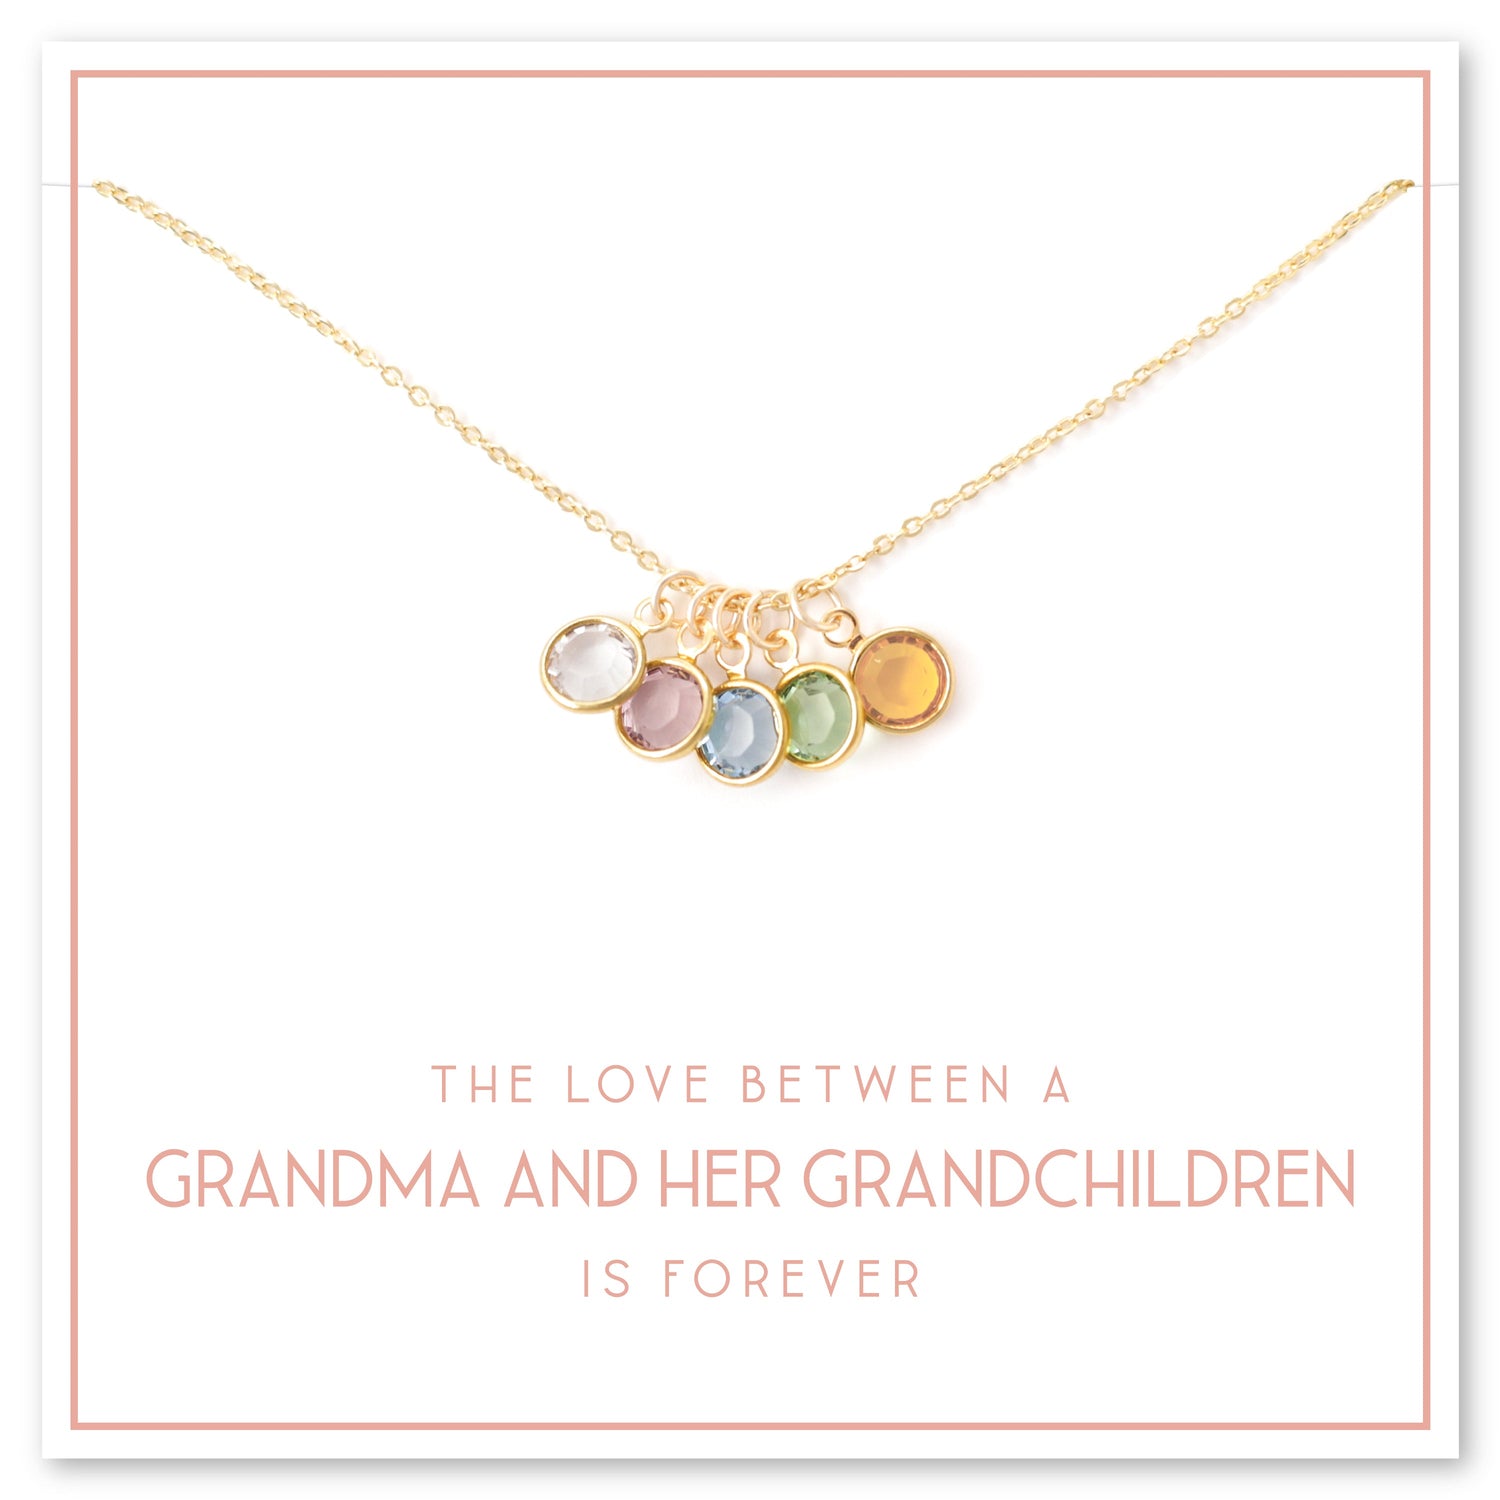 Birthstone Charm Necklace for Grandma, Gifts for Grandma, Grandmother Gift,  Grandmother Necklace, Grandma Gift From Grandchildren, Jewelry - Etsy